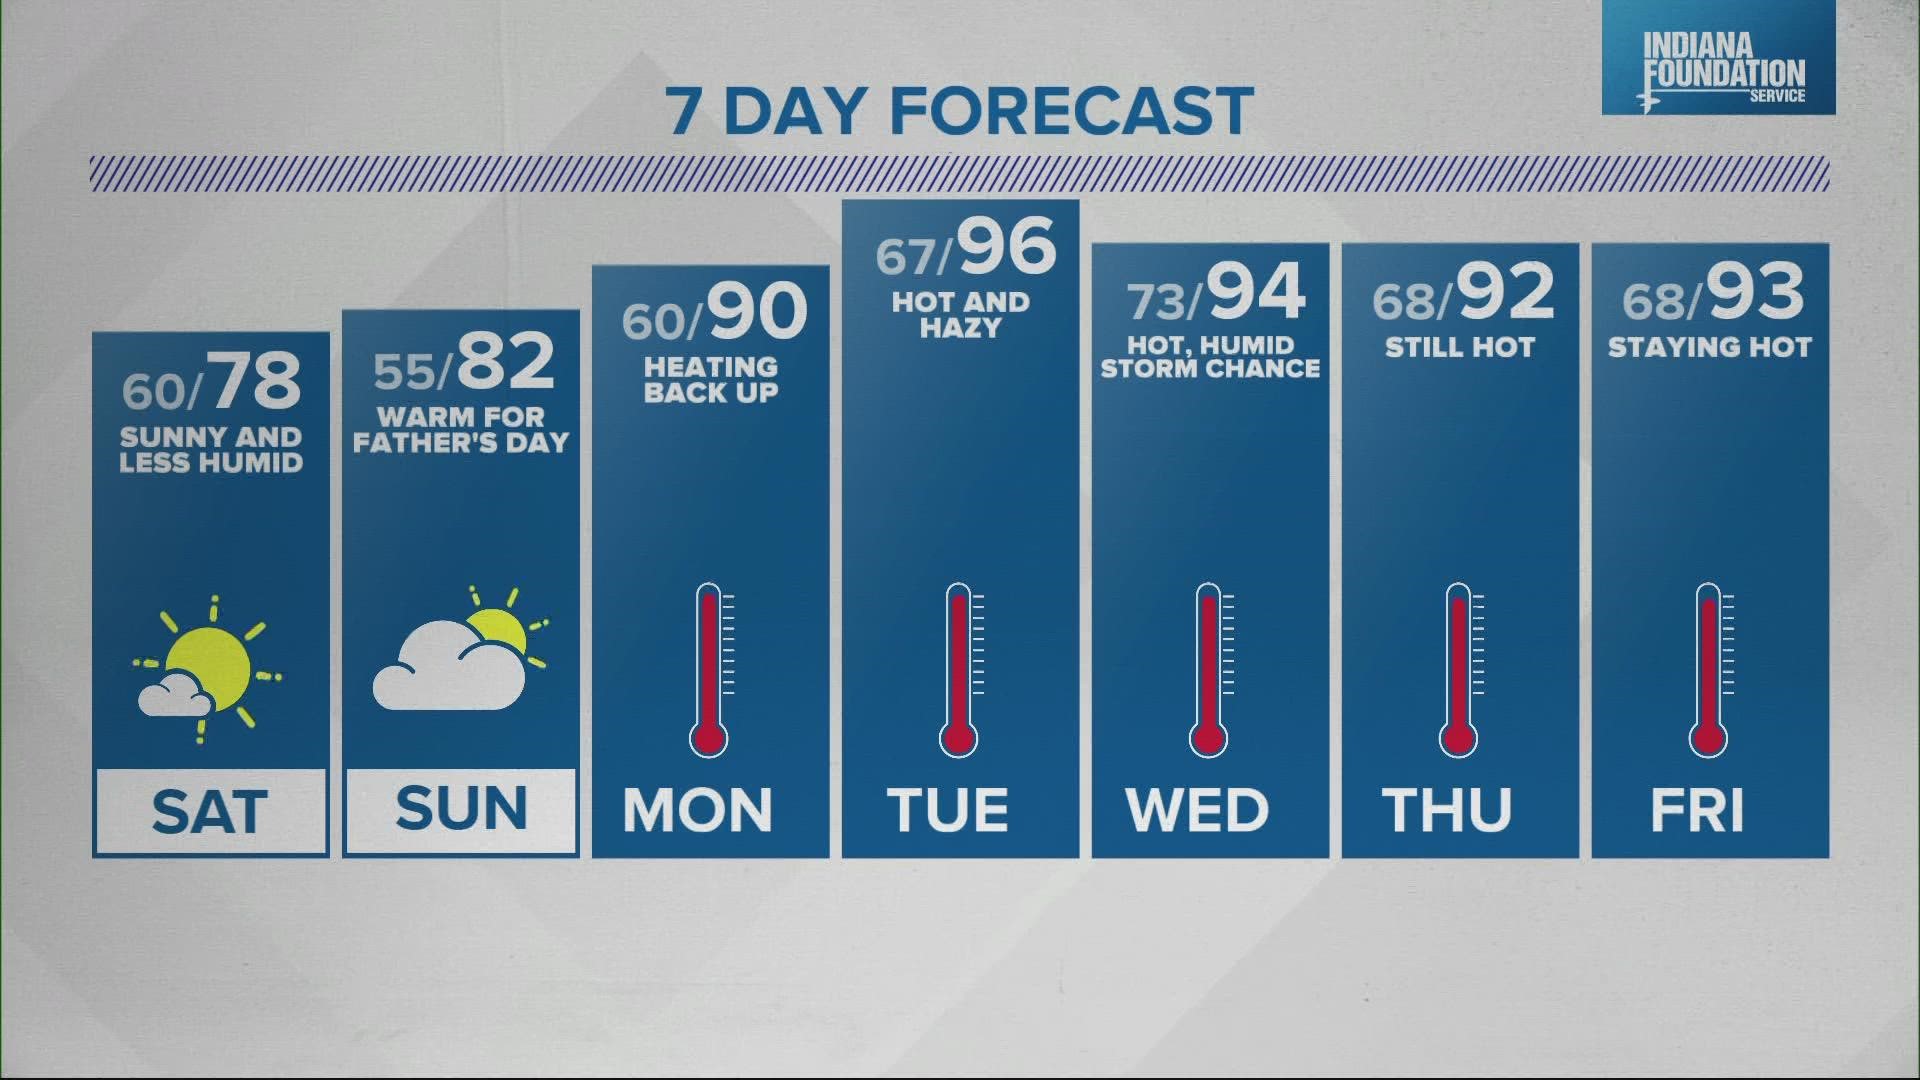 Angela is tracking a cool and refreshing weekend before another heat wave arrives next week.